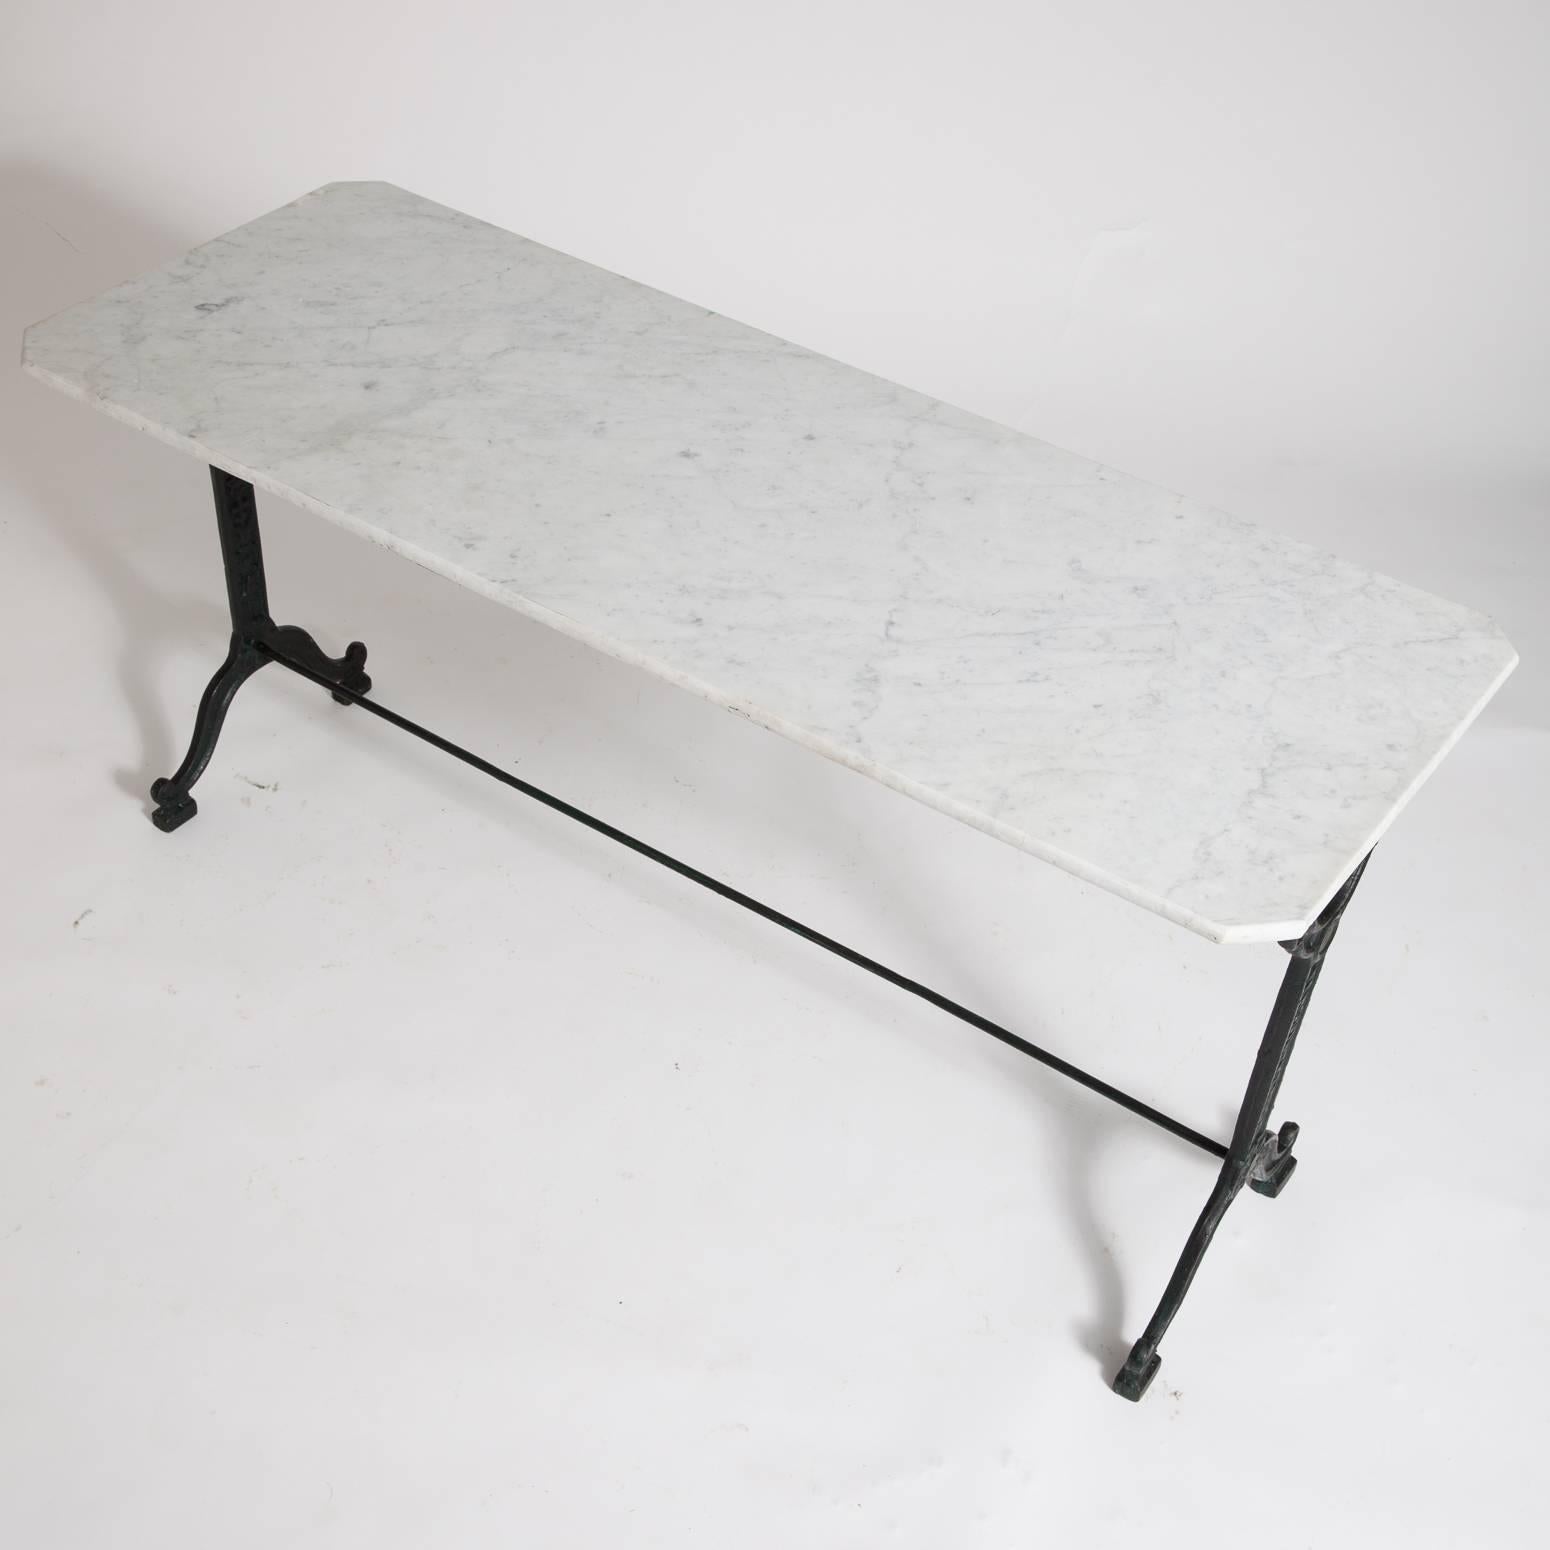 The cast iron base of this table has a central rod for stability and is painted a very dark rich green. It is marked Fenouil Hennon, metal-workers of Nimes France.

Measures: 58” long,
22” wide,
28” high.